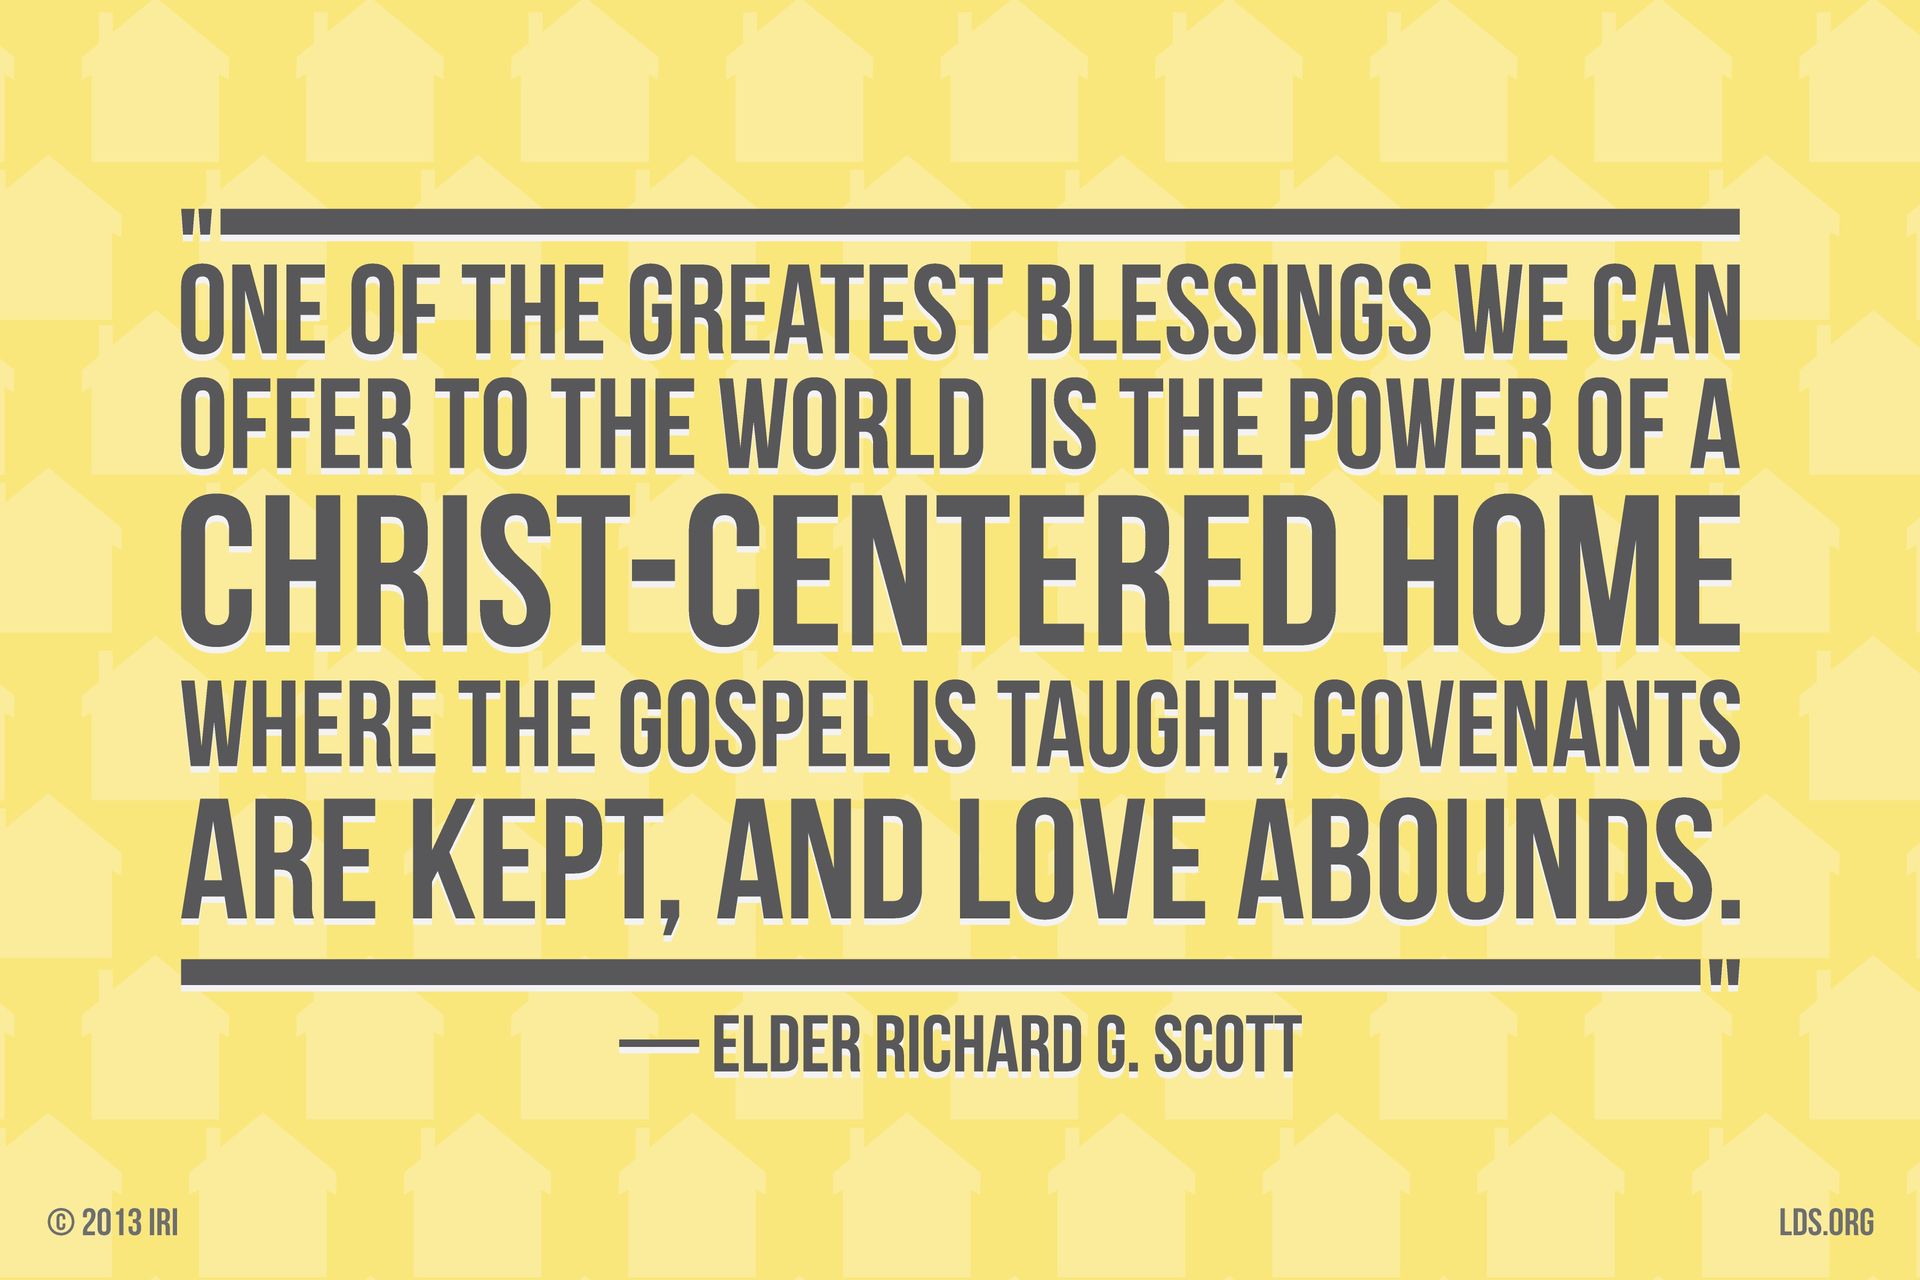 “One of the greatest blessings we can offer to the world is the power of a Christ-centered home where the gospel is taught, covenants are kept, and love abounds.”—Elder Richard G. Scott, “For Peace at Home”